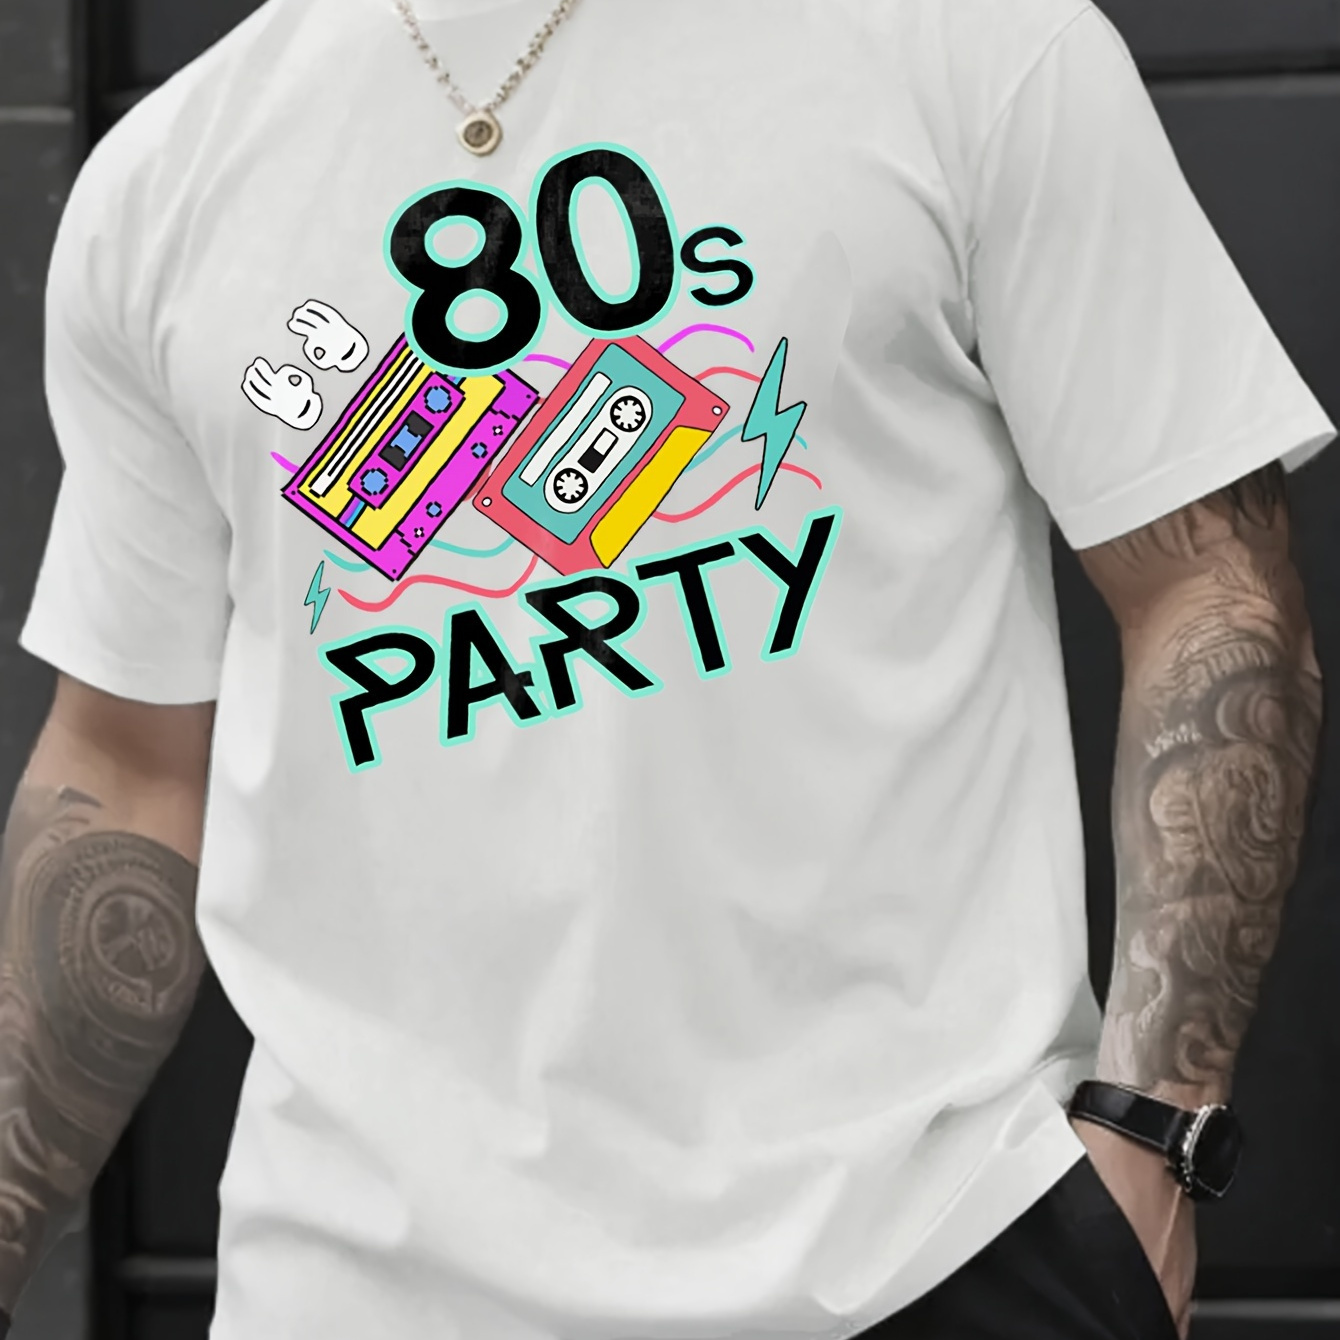 

80s Party" Creative Print Casual Novelty T-shirt For Men, Short Sleeve Summer& Spring Top, Comfort Fit, Stylish Streetwear Crew Neck Tee For Daily Wear